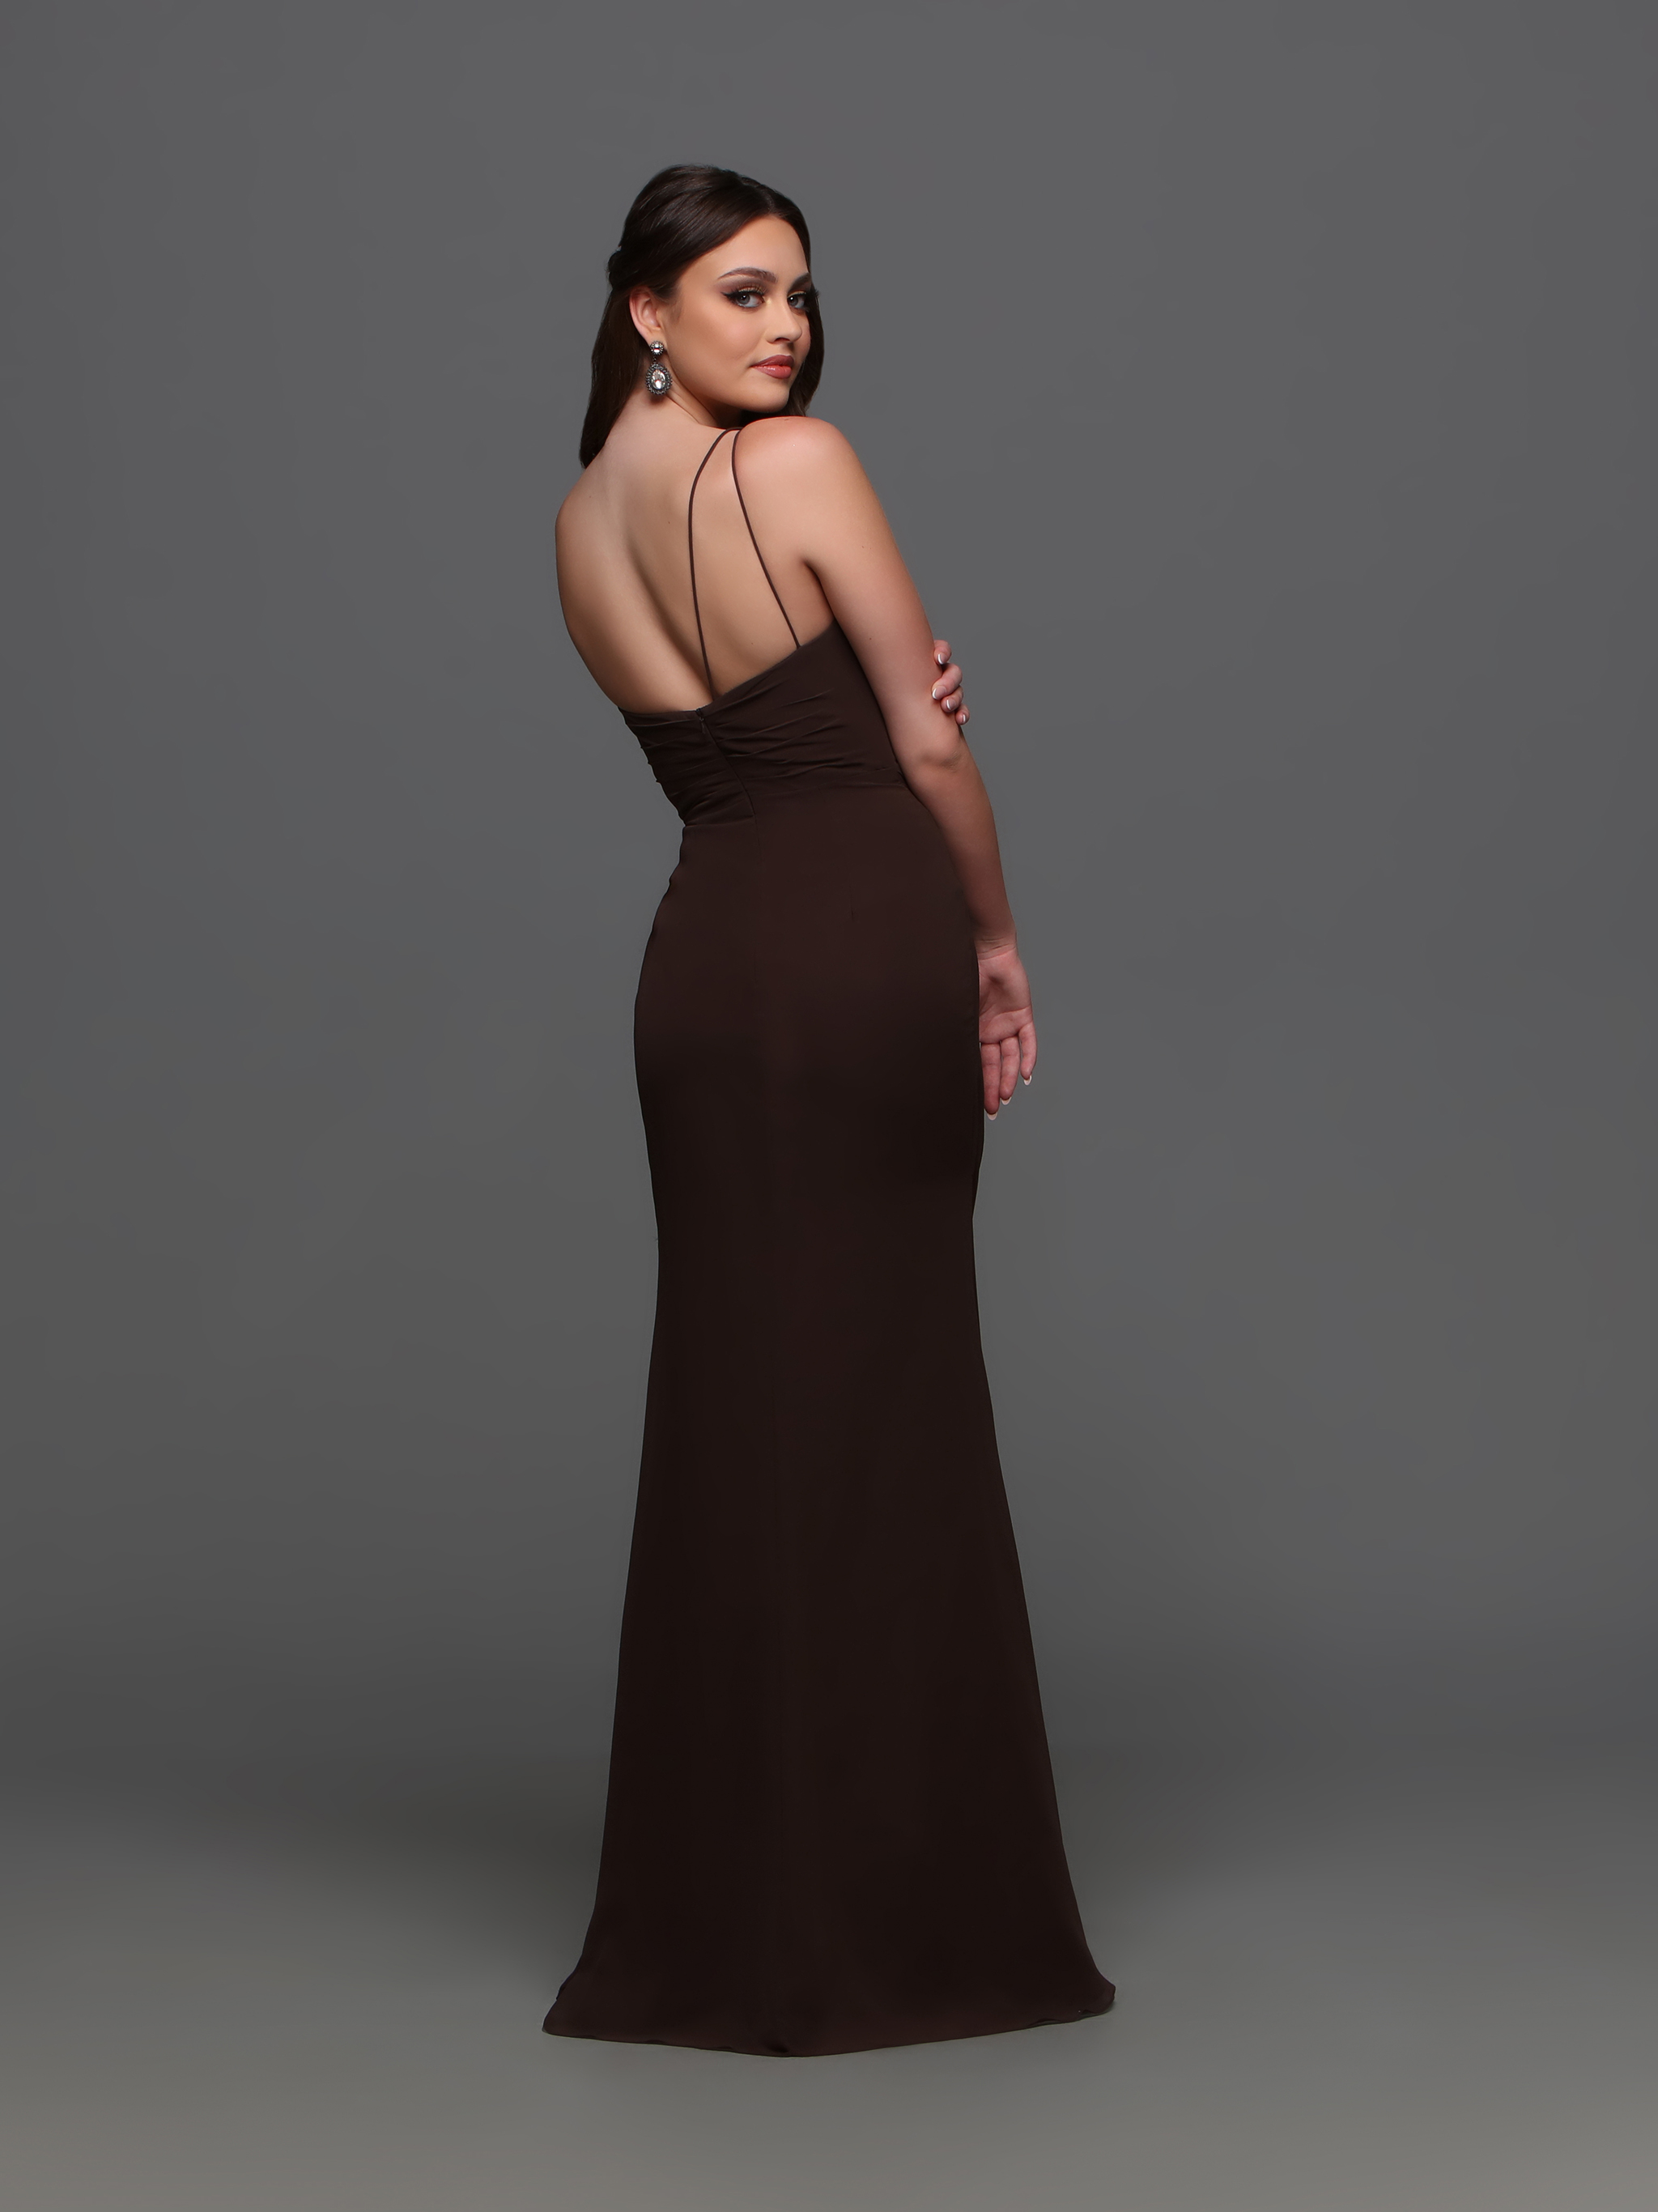 Image showing back view of style #60656